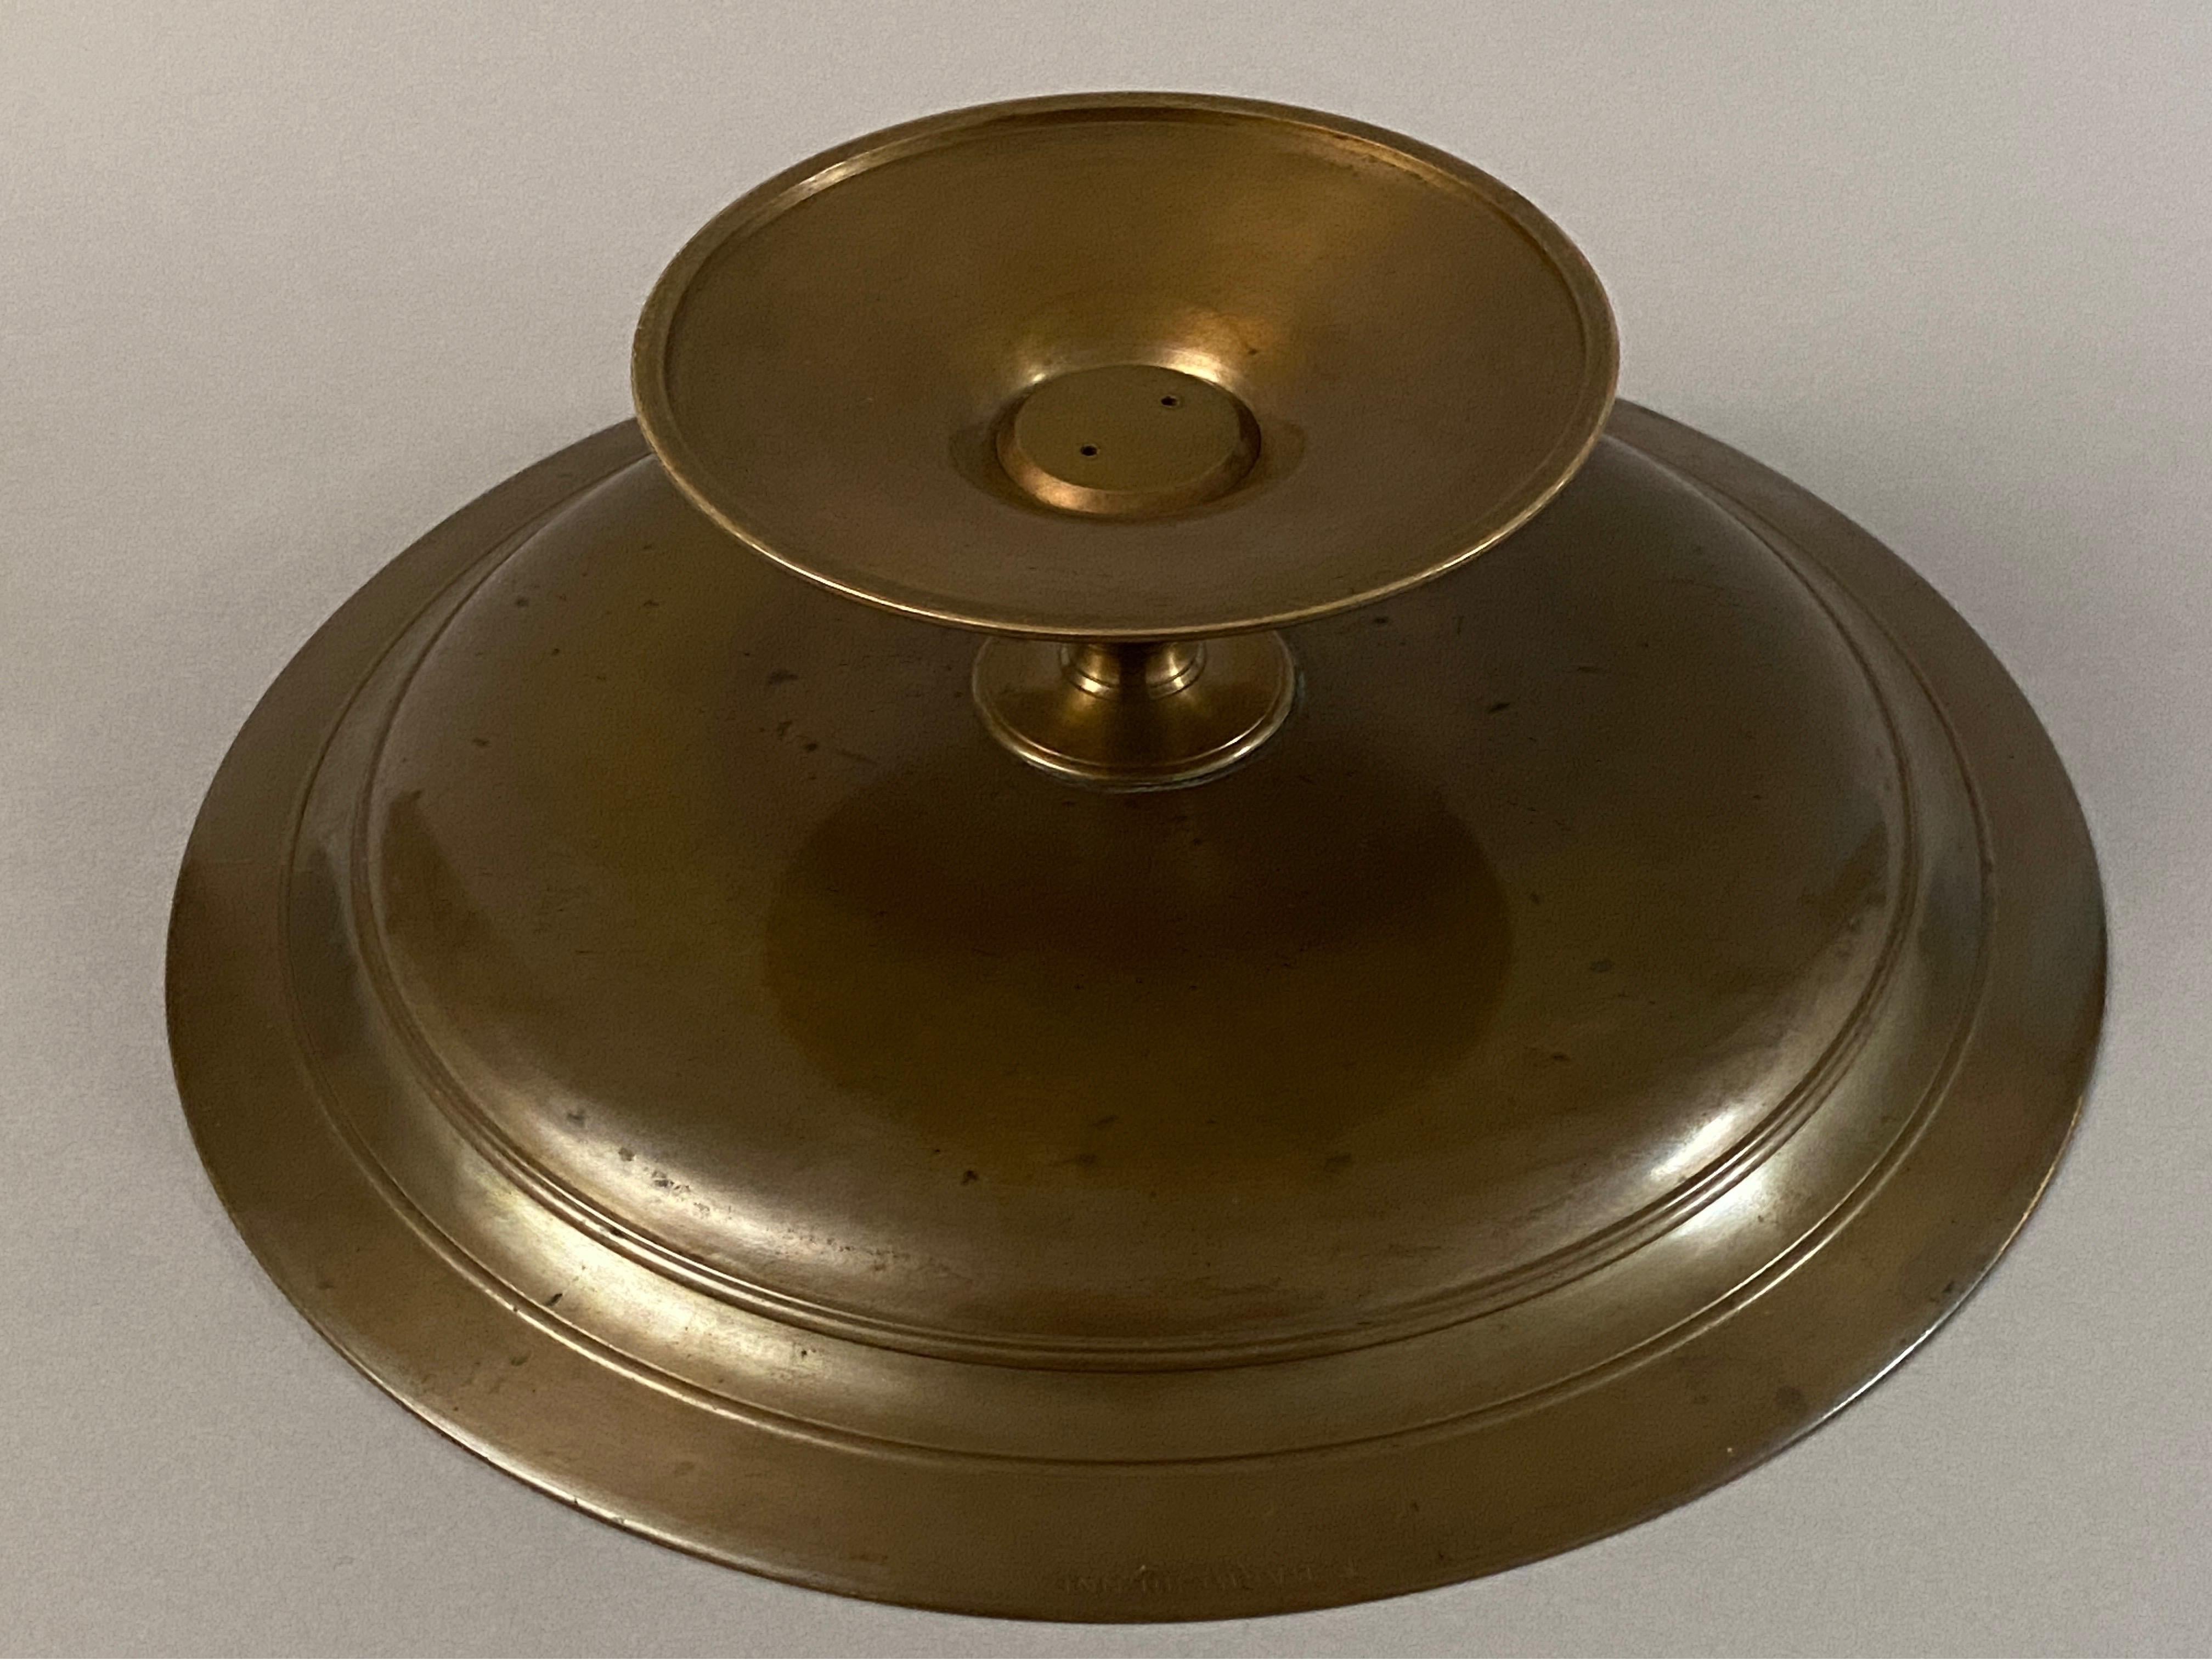 19th Century Tazza Cup in Gilt and Patinated Bronze by Levillain and Barbedienne 1